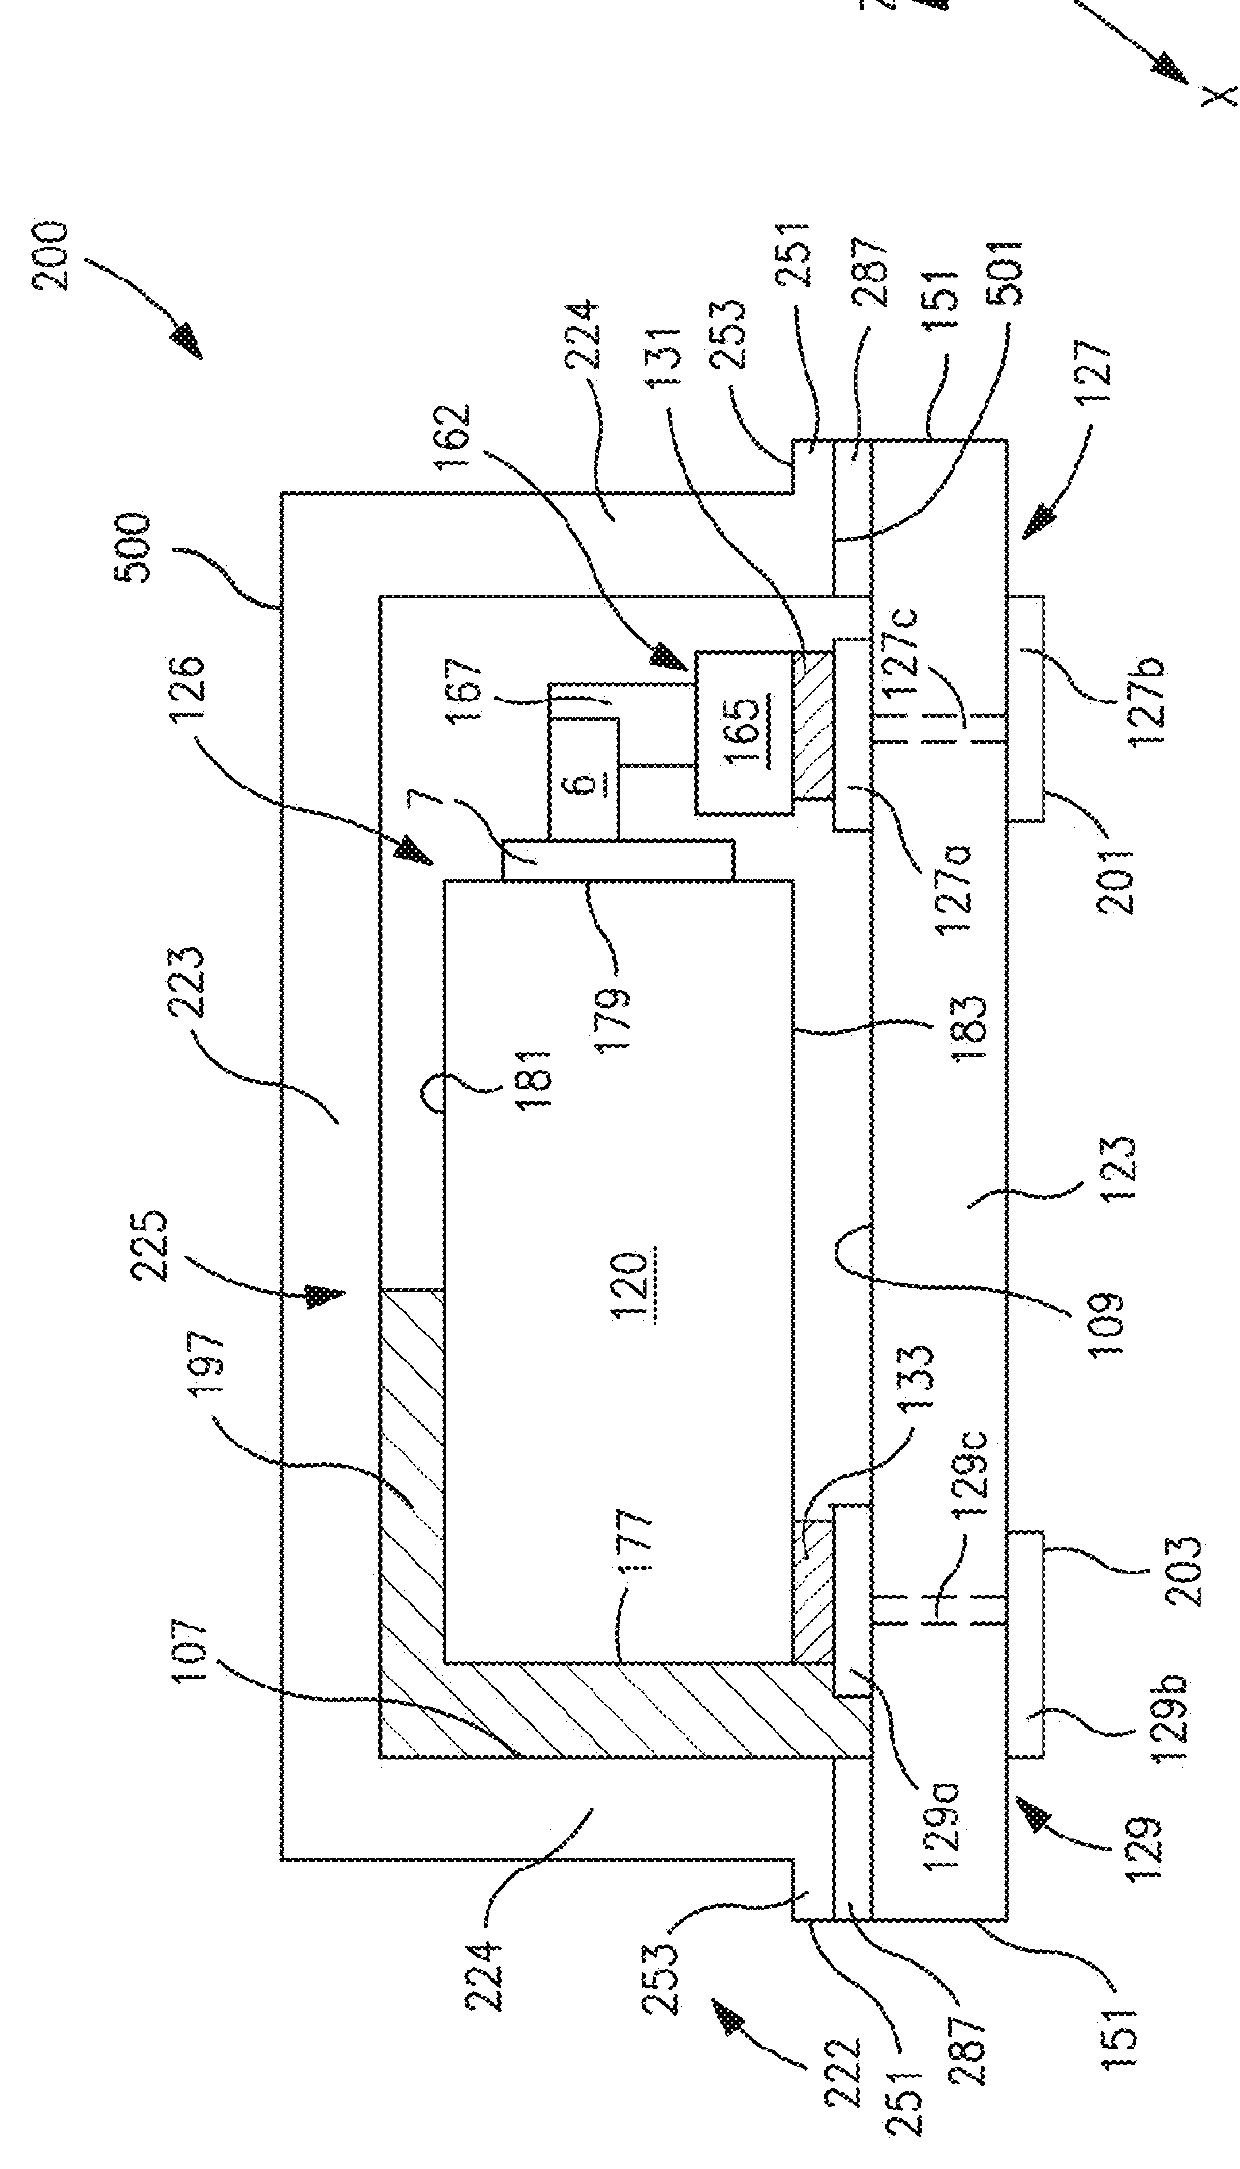 Solid Electrolytic Capacitor with Improved Performance at High Temperatures and Voltages